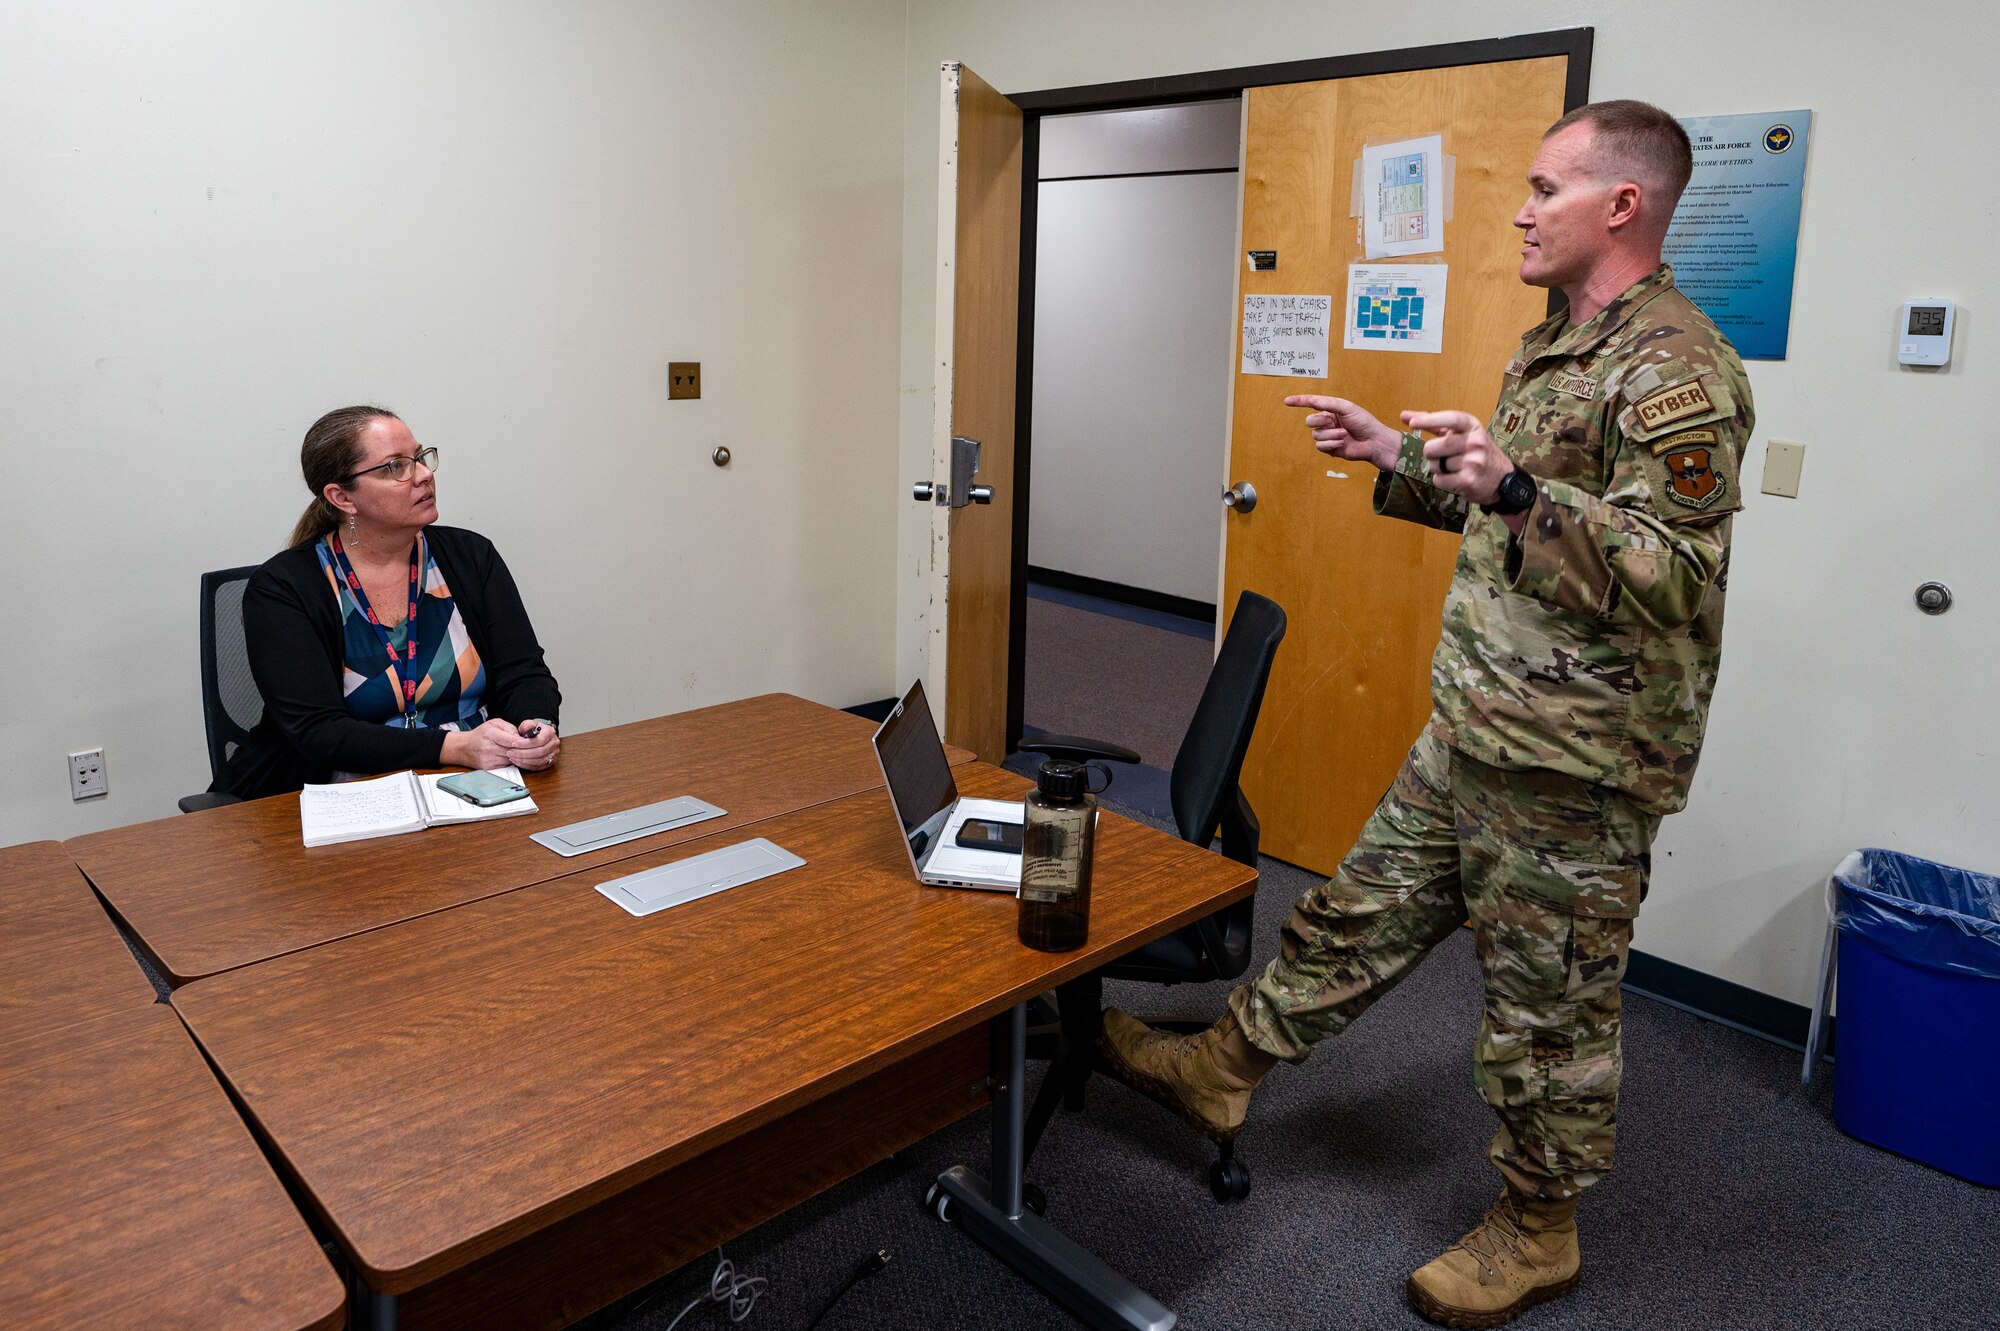 U.S. Air Force Capt. Gregory Hutchins, 333rd Training Squadron instructor, and KC Curtis, Biloxi school district instructional coach, discuss ways of delivering educational material to students at Keesler Air Force Base, Mississippi, March 18, 2024.